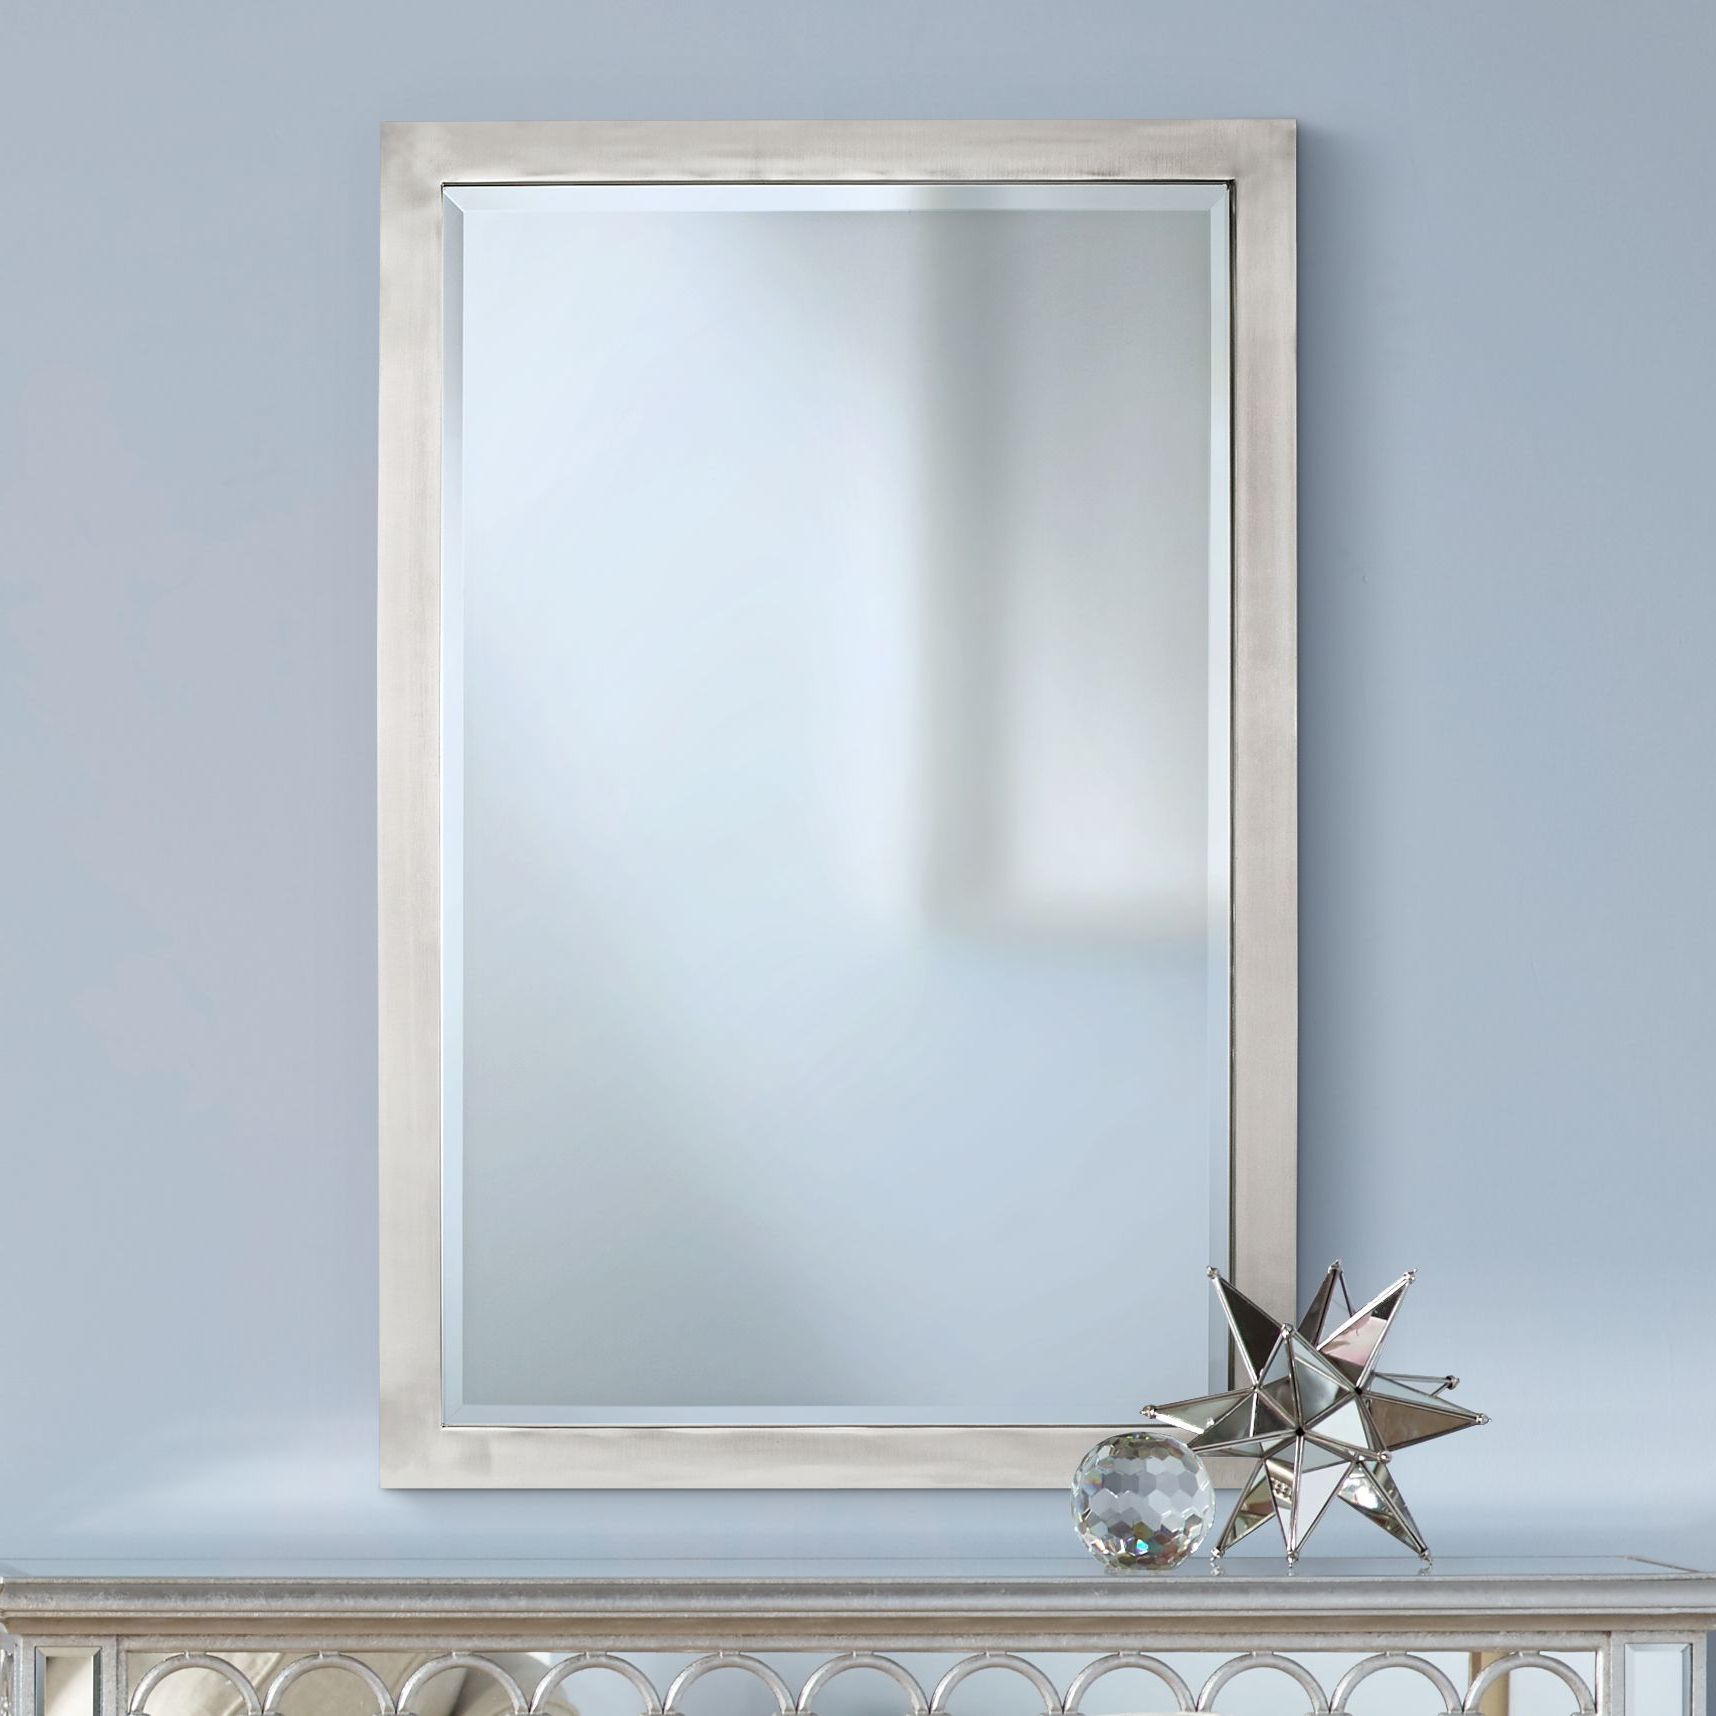 Lamps Plus In For Well Known Nickel Floating Wall Mirrors (View 8 of 15)